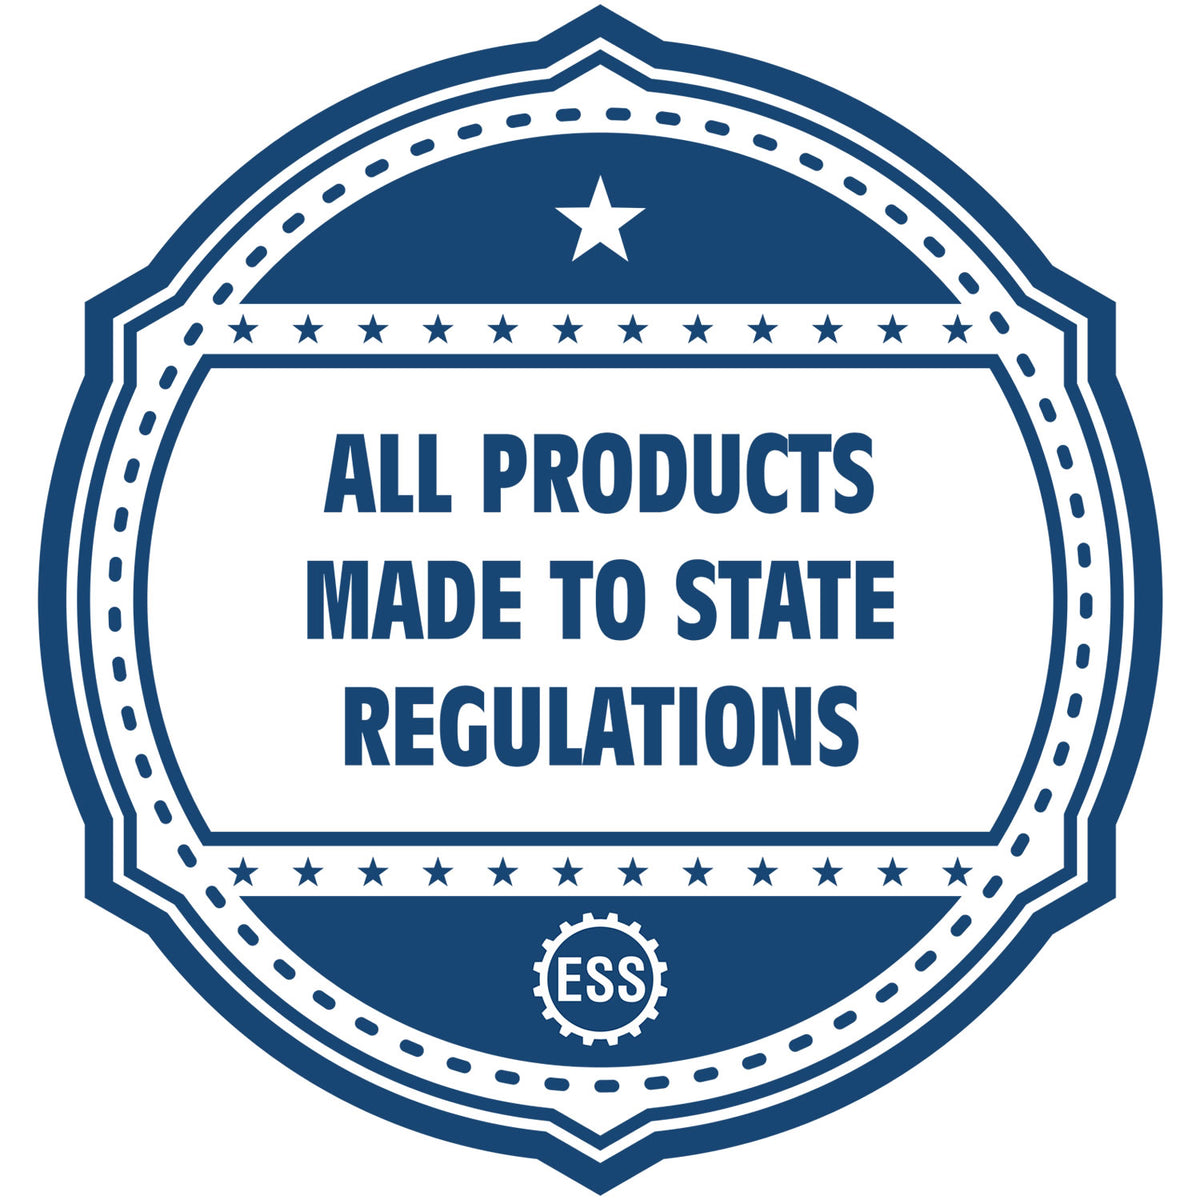 An icon or badge element for the Maryland Landscape Architectural Seal Stamp showing that this product is made in compliance with state regulations.